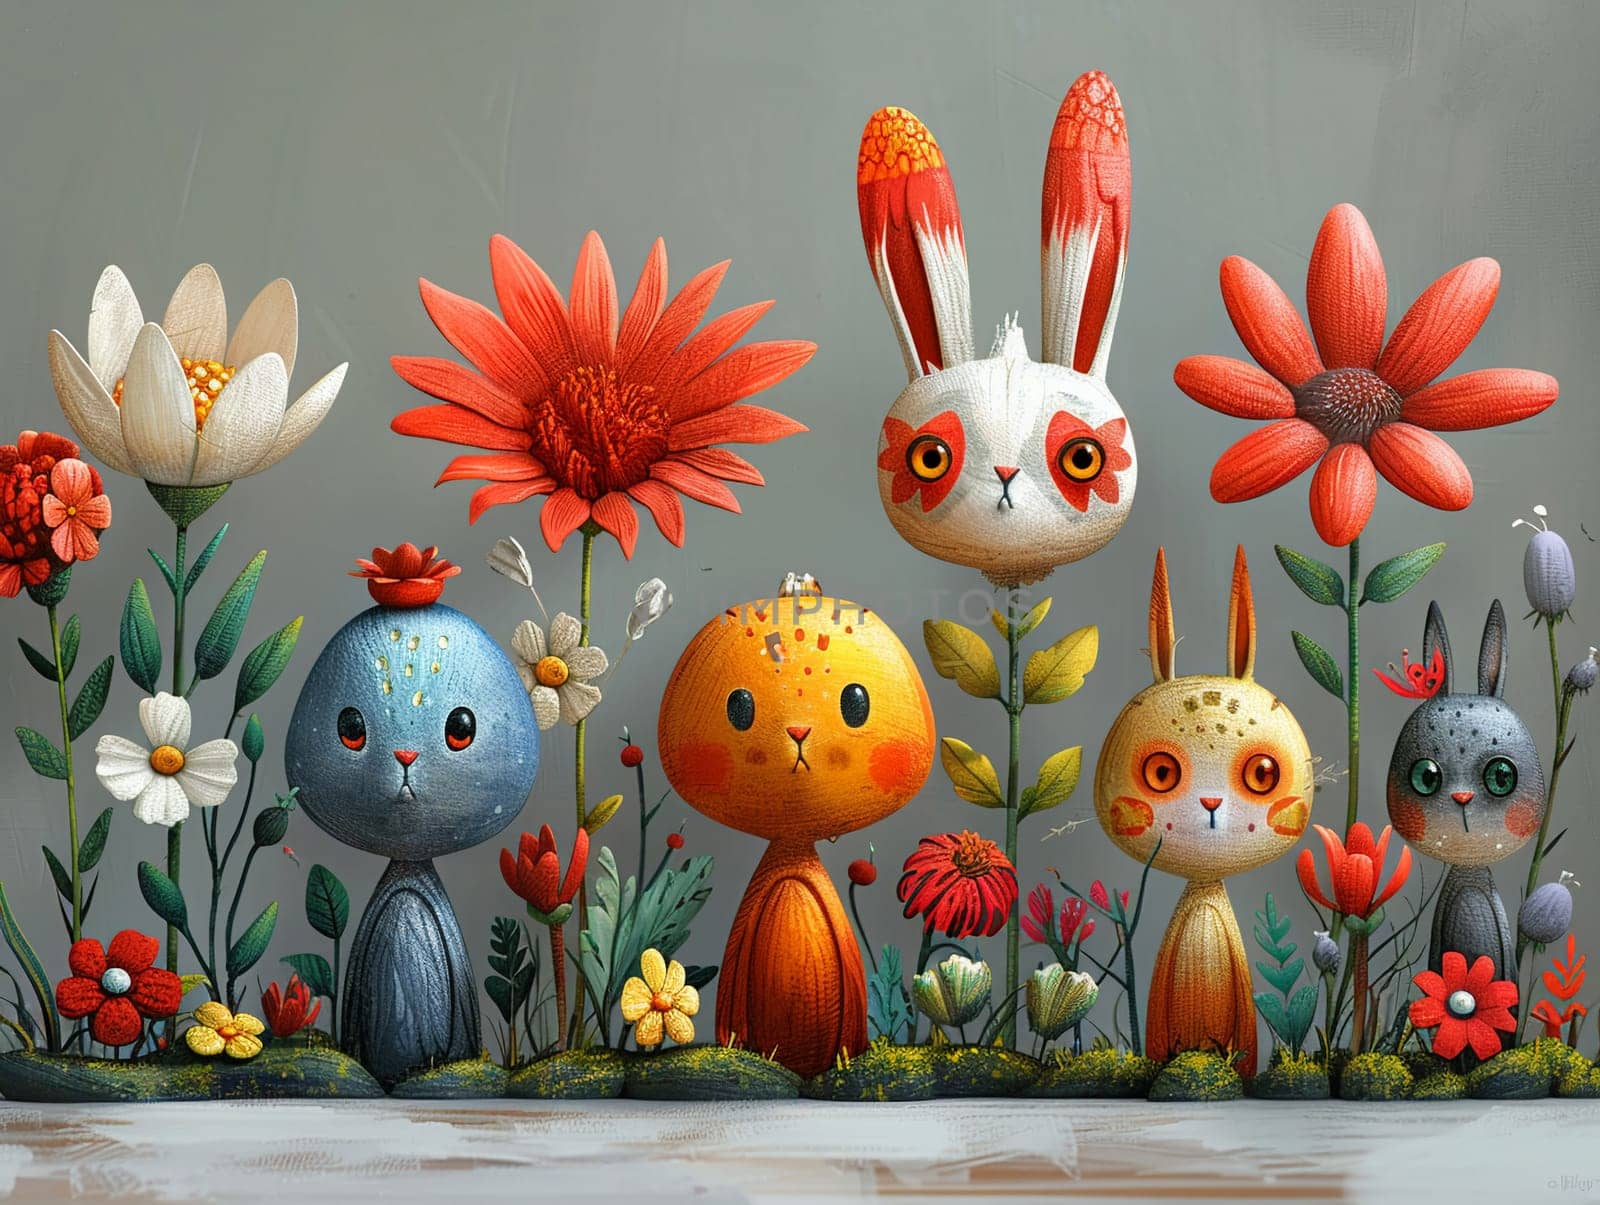 Flower-themed whimsical character designs by Benzoix